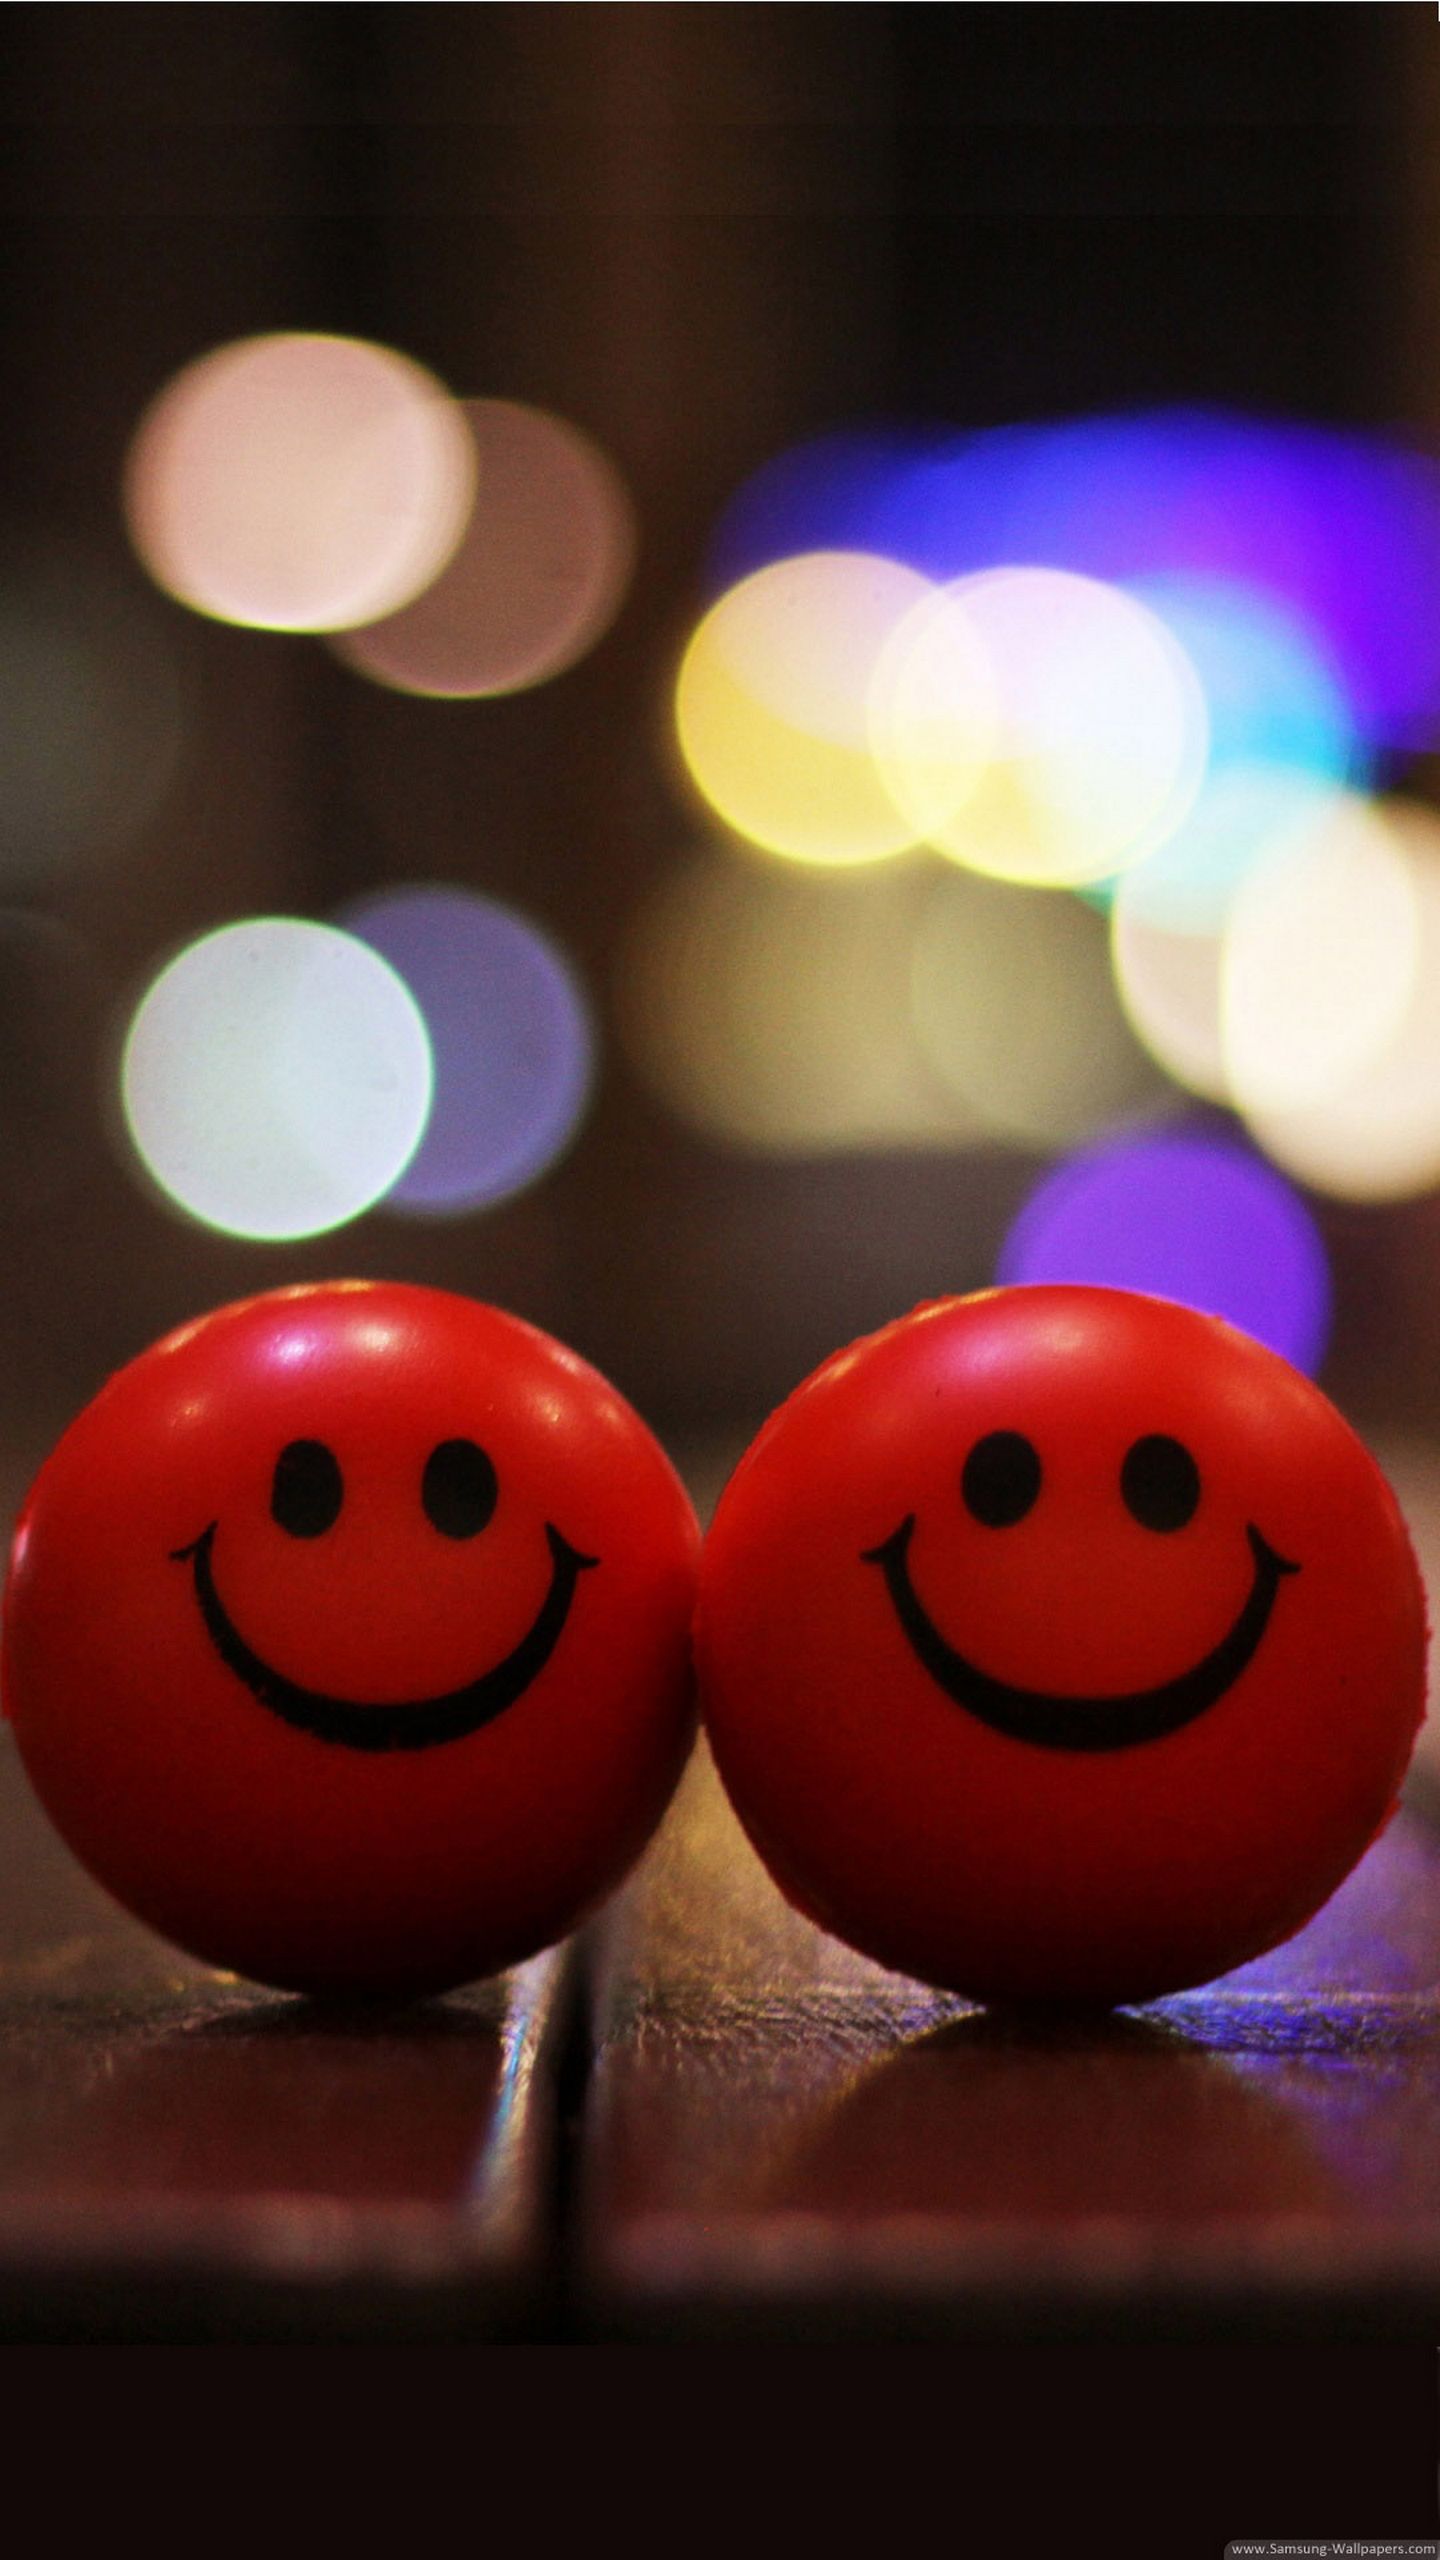 Two Little Red Smiley Balls Wallpaper Cute Love